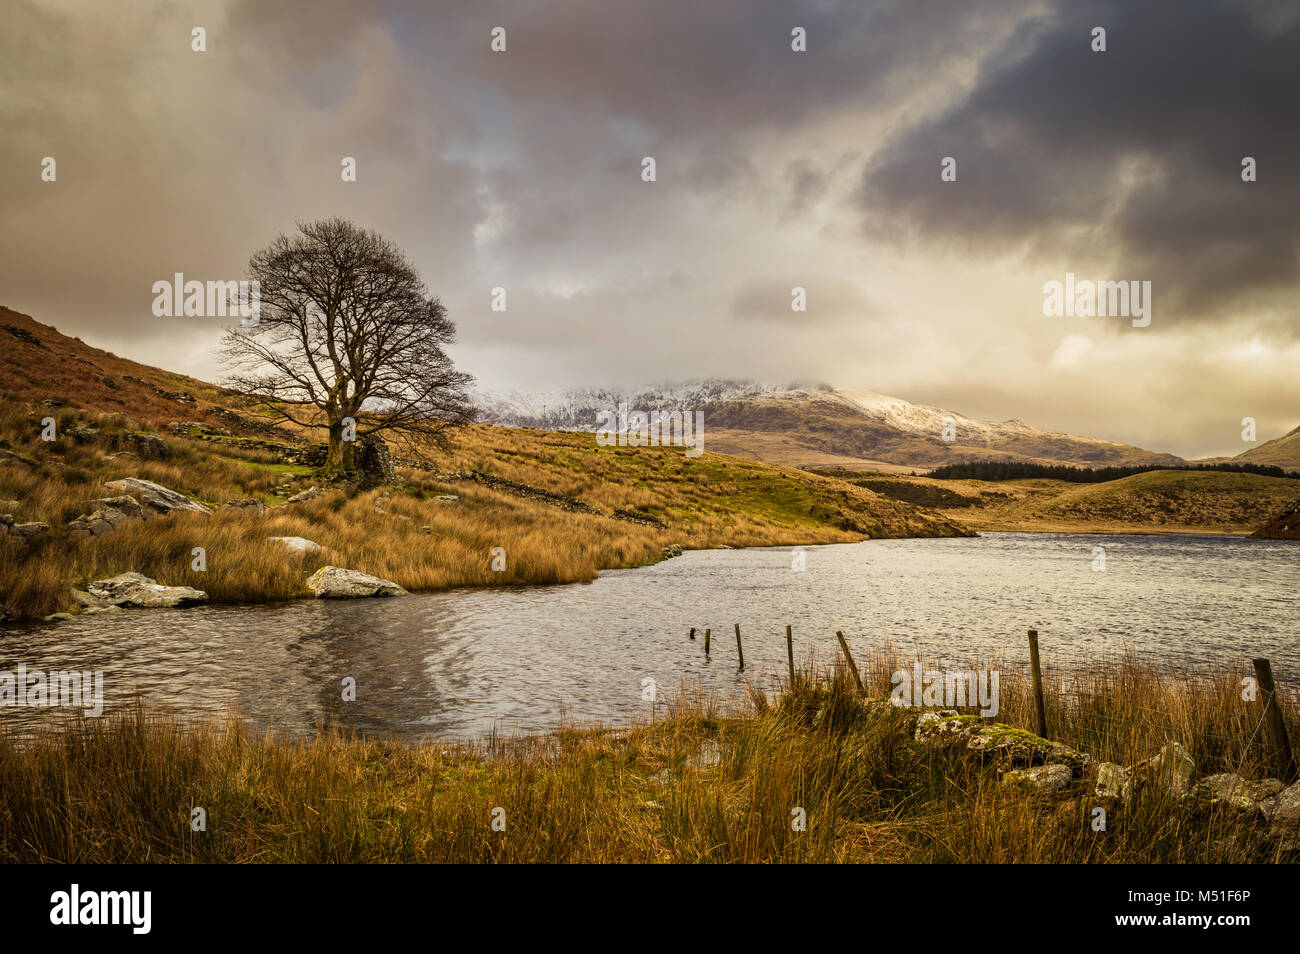 A lone tree by Llyn Y Dywarchen in the Snowdonia National Park, with Mount Snowdon in the distance. Stock Photo